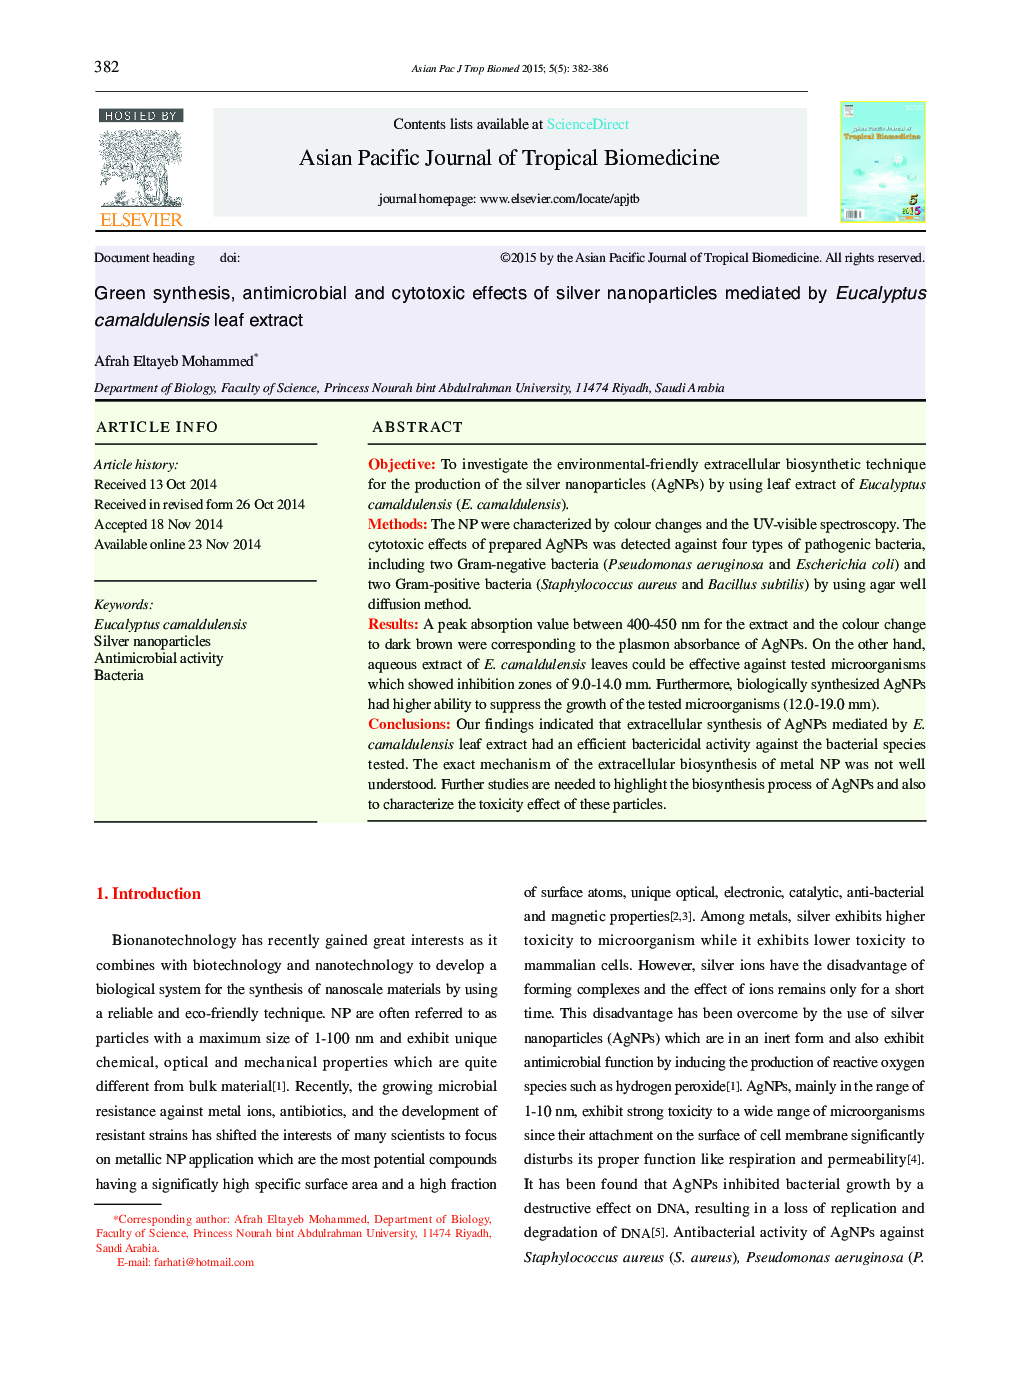 Green synthesis, antimicrobial and cytotoxic effects of silver nanoparticles mediated by Eucalyptus camaldulensis leaf extract 